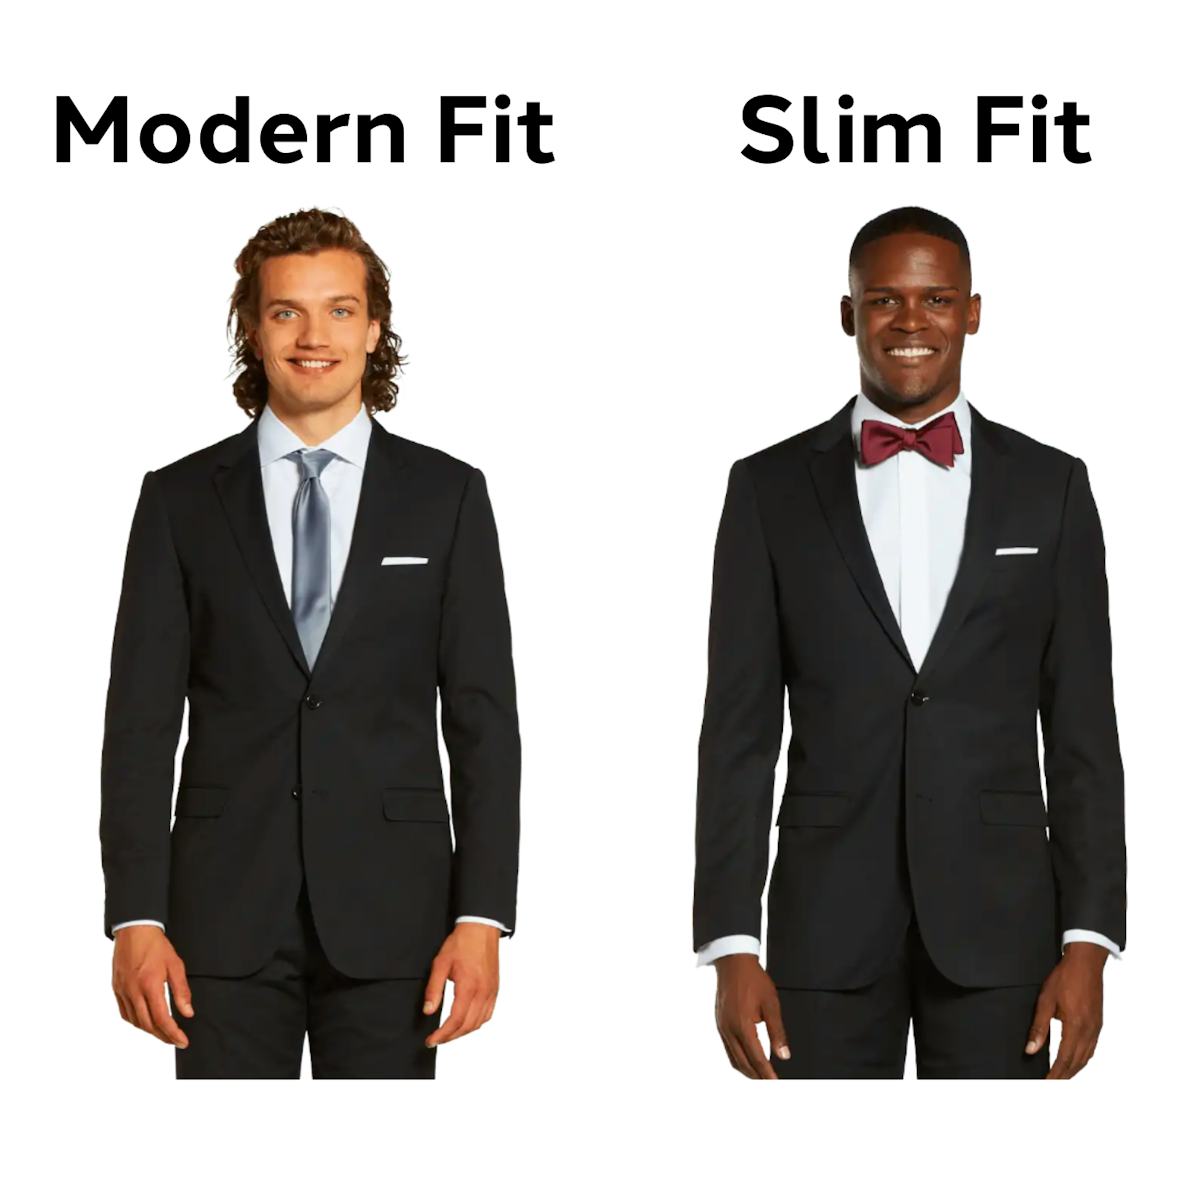 The difference between Modern Fit vs Slim Fit Jacket, Modern Cut vs Fit Cut Jacket, Modern vs Slim Jacket